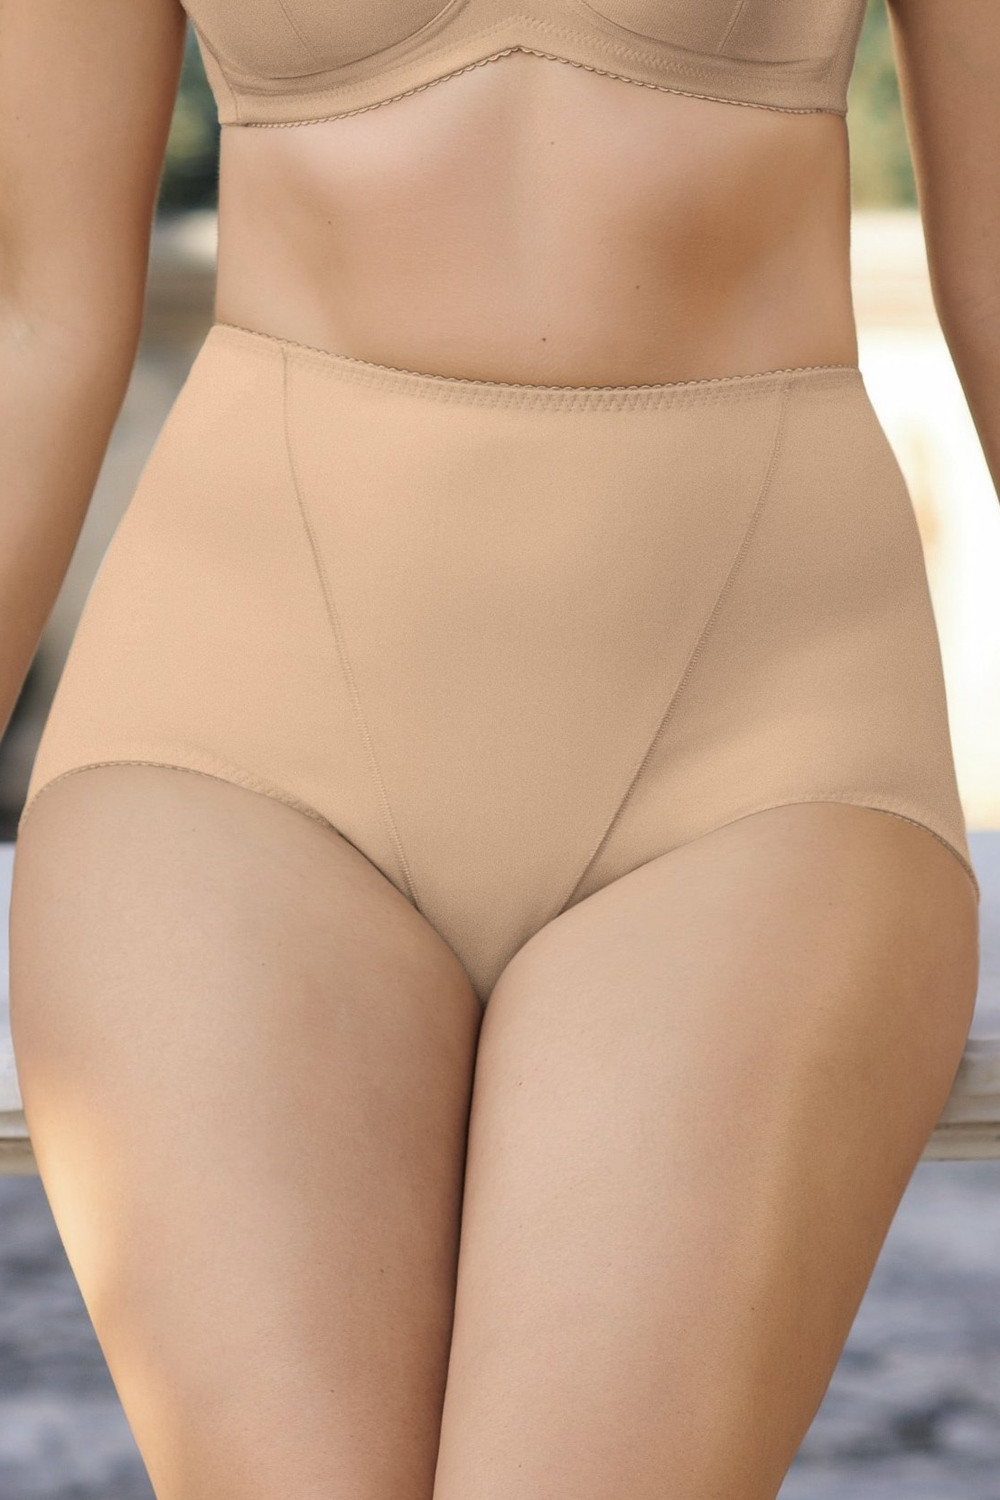 https://aldipa.gr/eshop/8065-superlarge_default/comfortable-panty-girdle-does-not-press-the-belly-comfort-all-day-long-1849.jpg